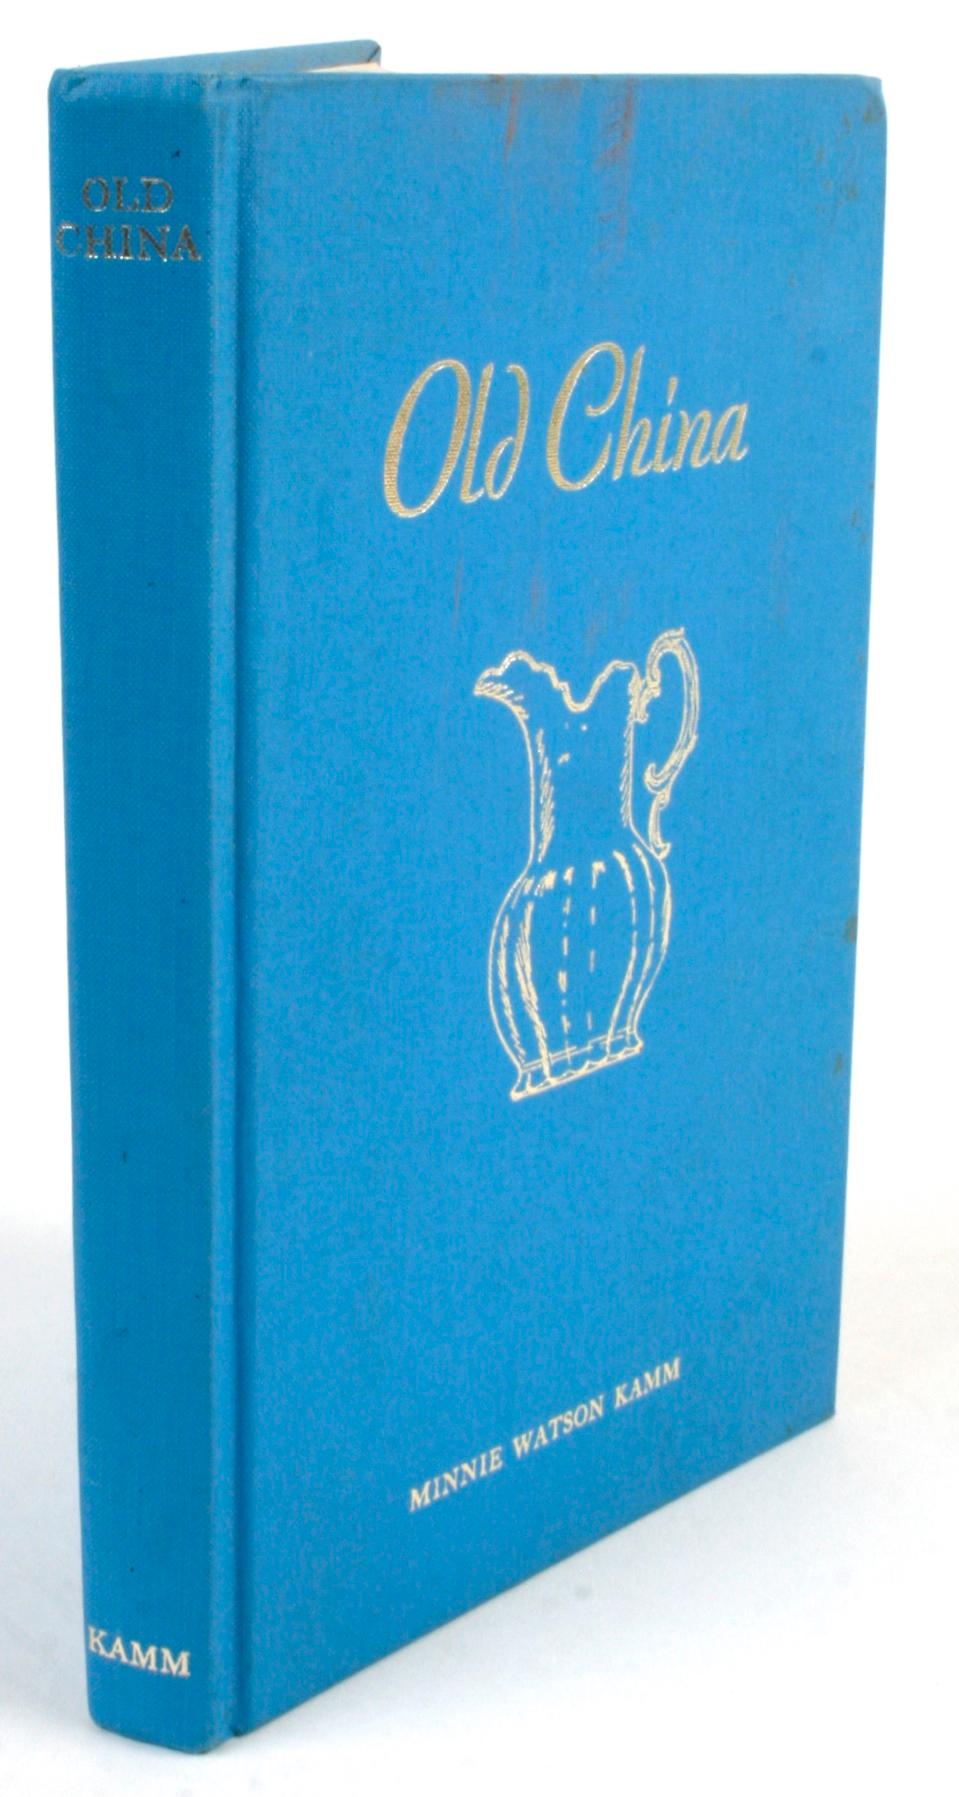 Old China by Minnie Watson Kamm, First Edition 9